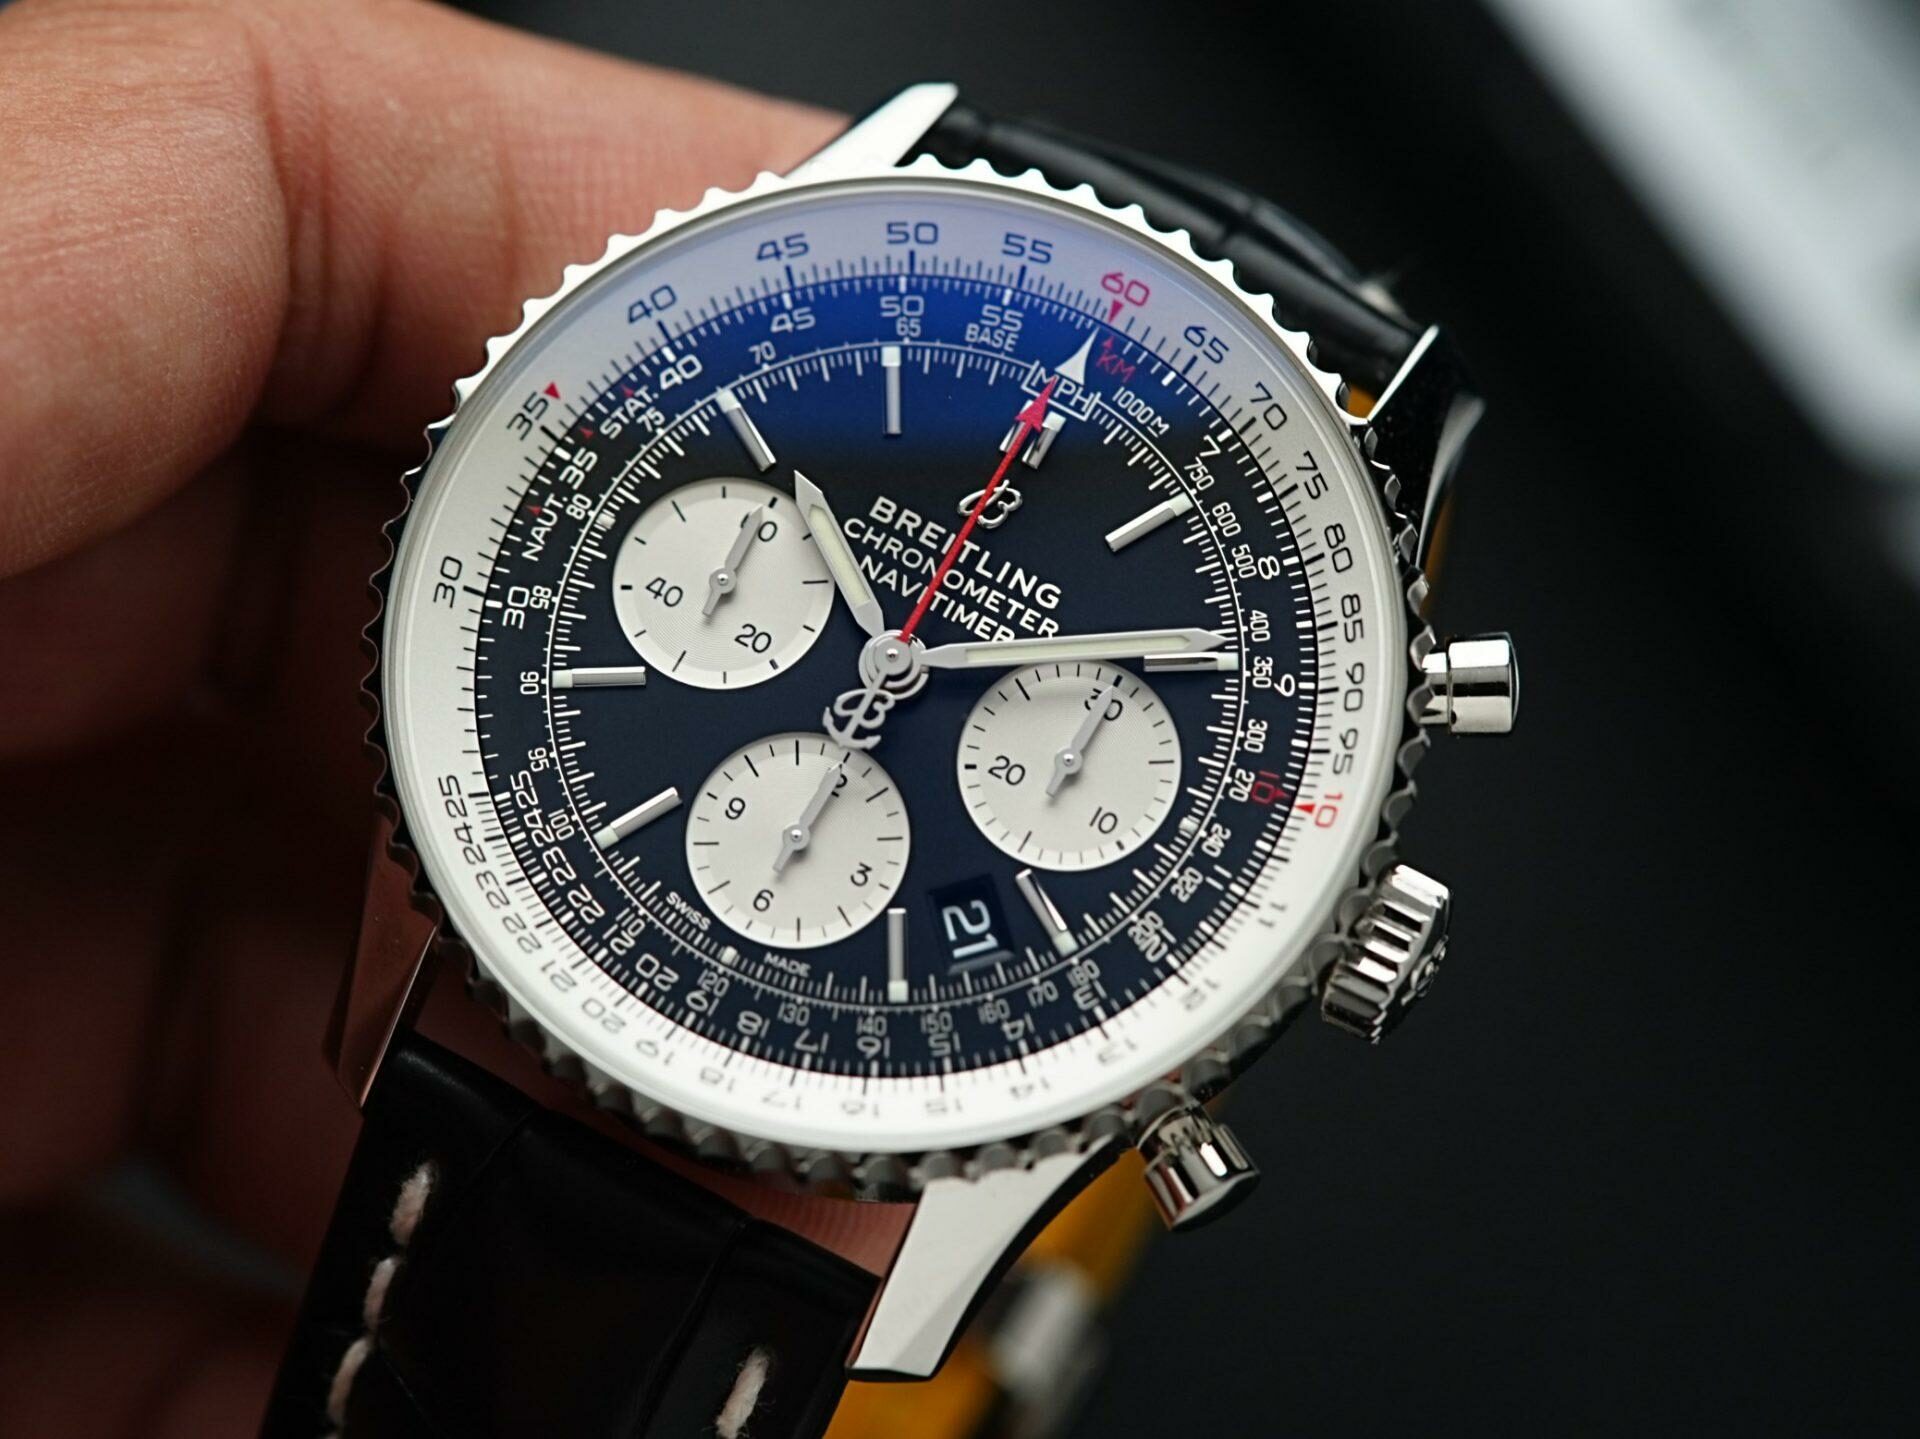 Breitling Navitimer 1 B01 Chronograph 43 2022 being held in hand.